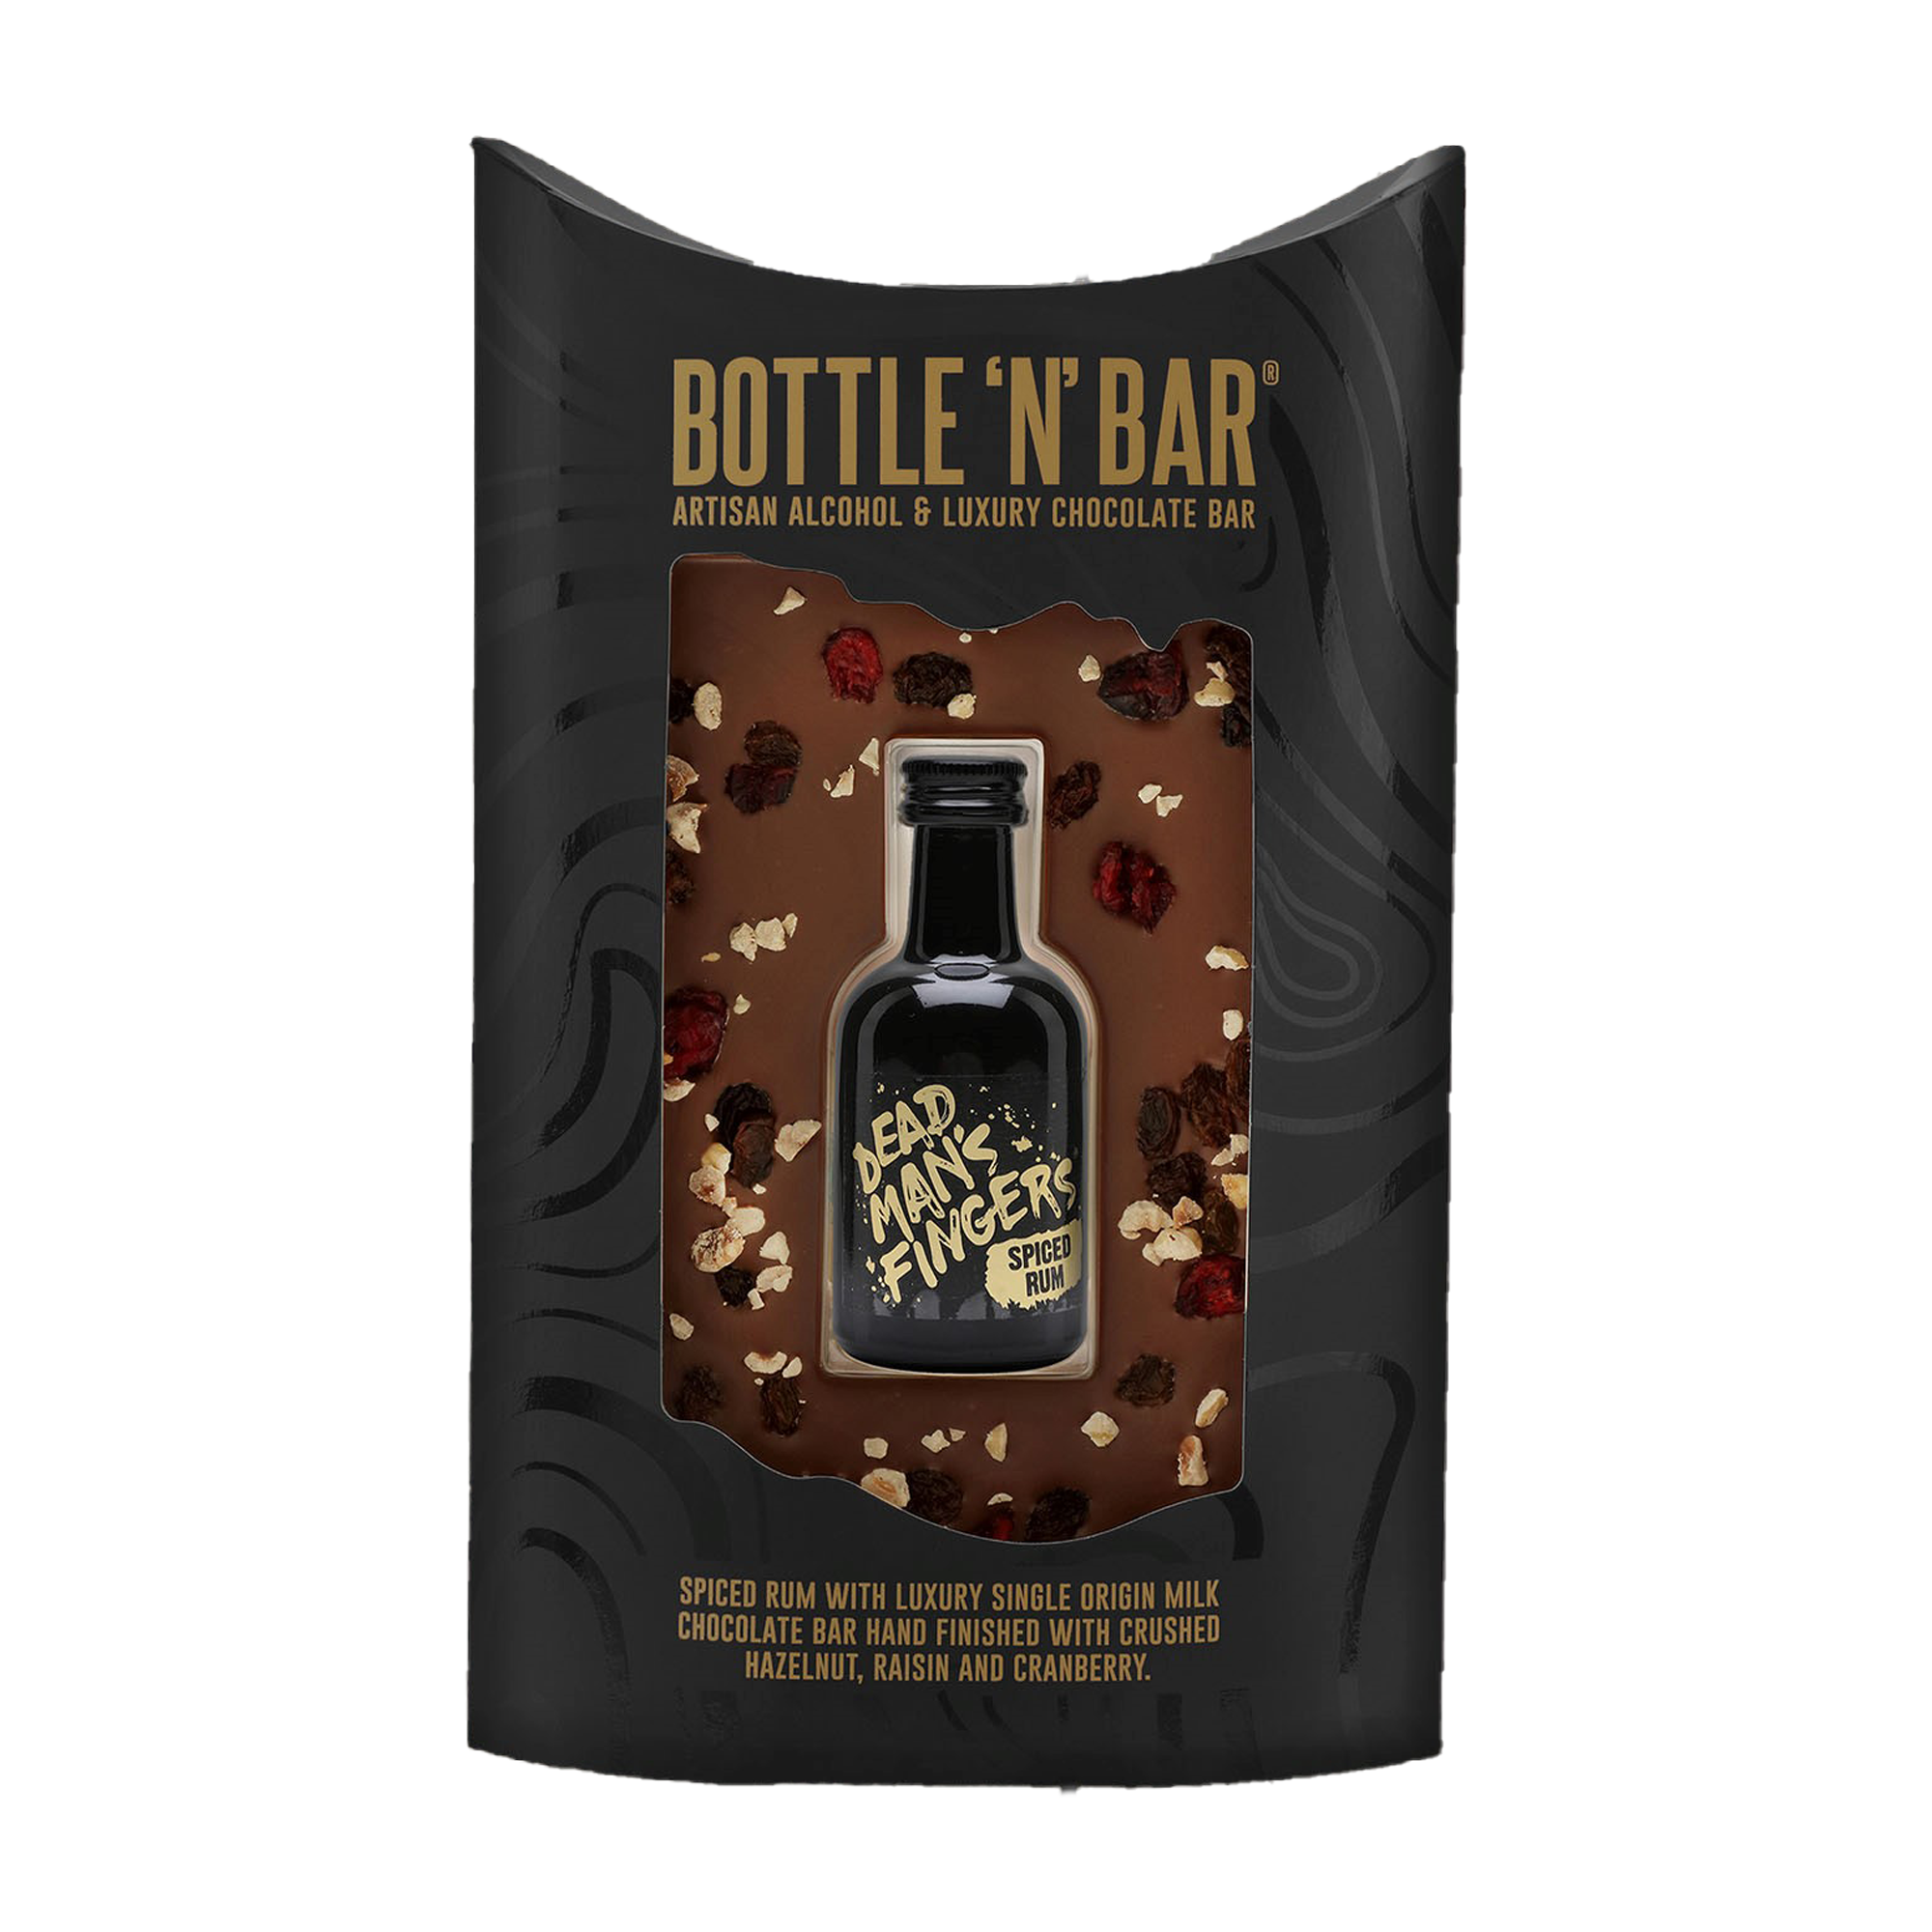 Bottle 'N' Bar Dead Man's Fingers & Milk Chocolate by The Pop Up Deli - The Pop Up Deli